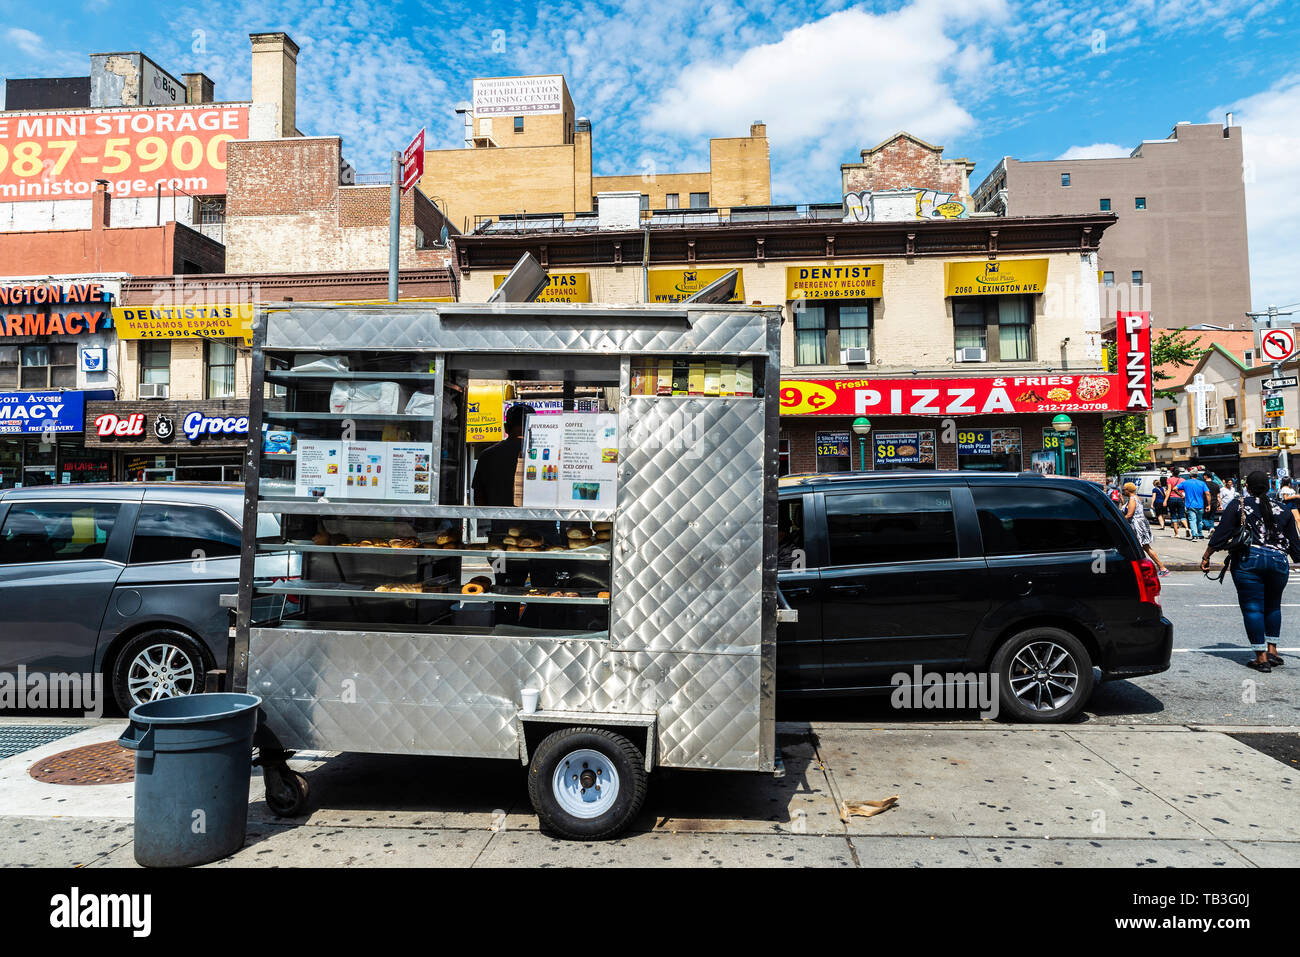 New York City, USA - July 31, 2018: Street food stalls of cookies, shops, farmacy, dentist, grocery and pizzeria with people around in Harlem, New Yor Stock Photo